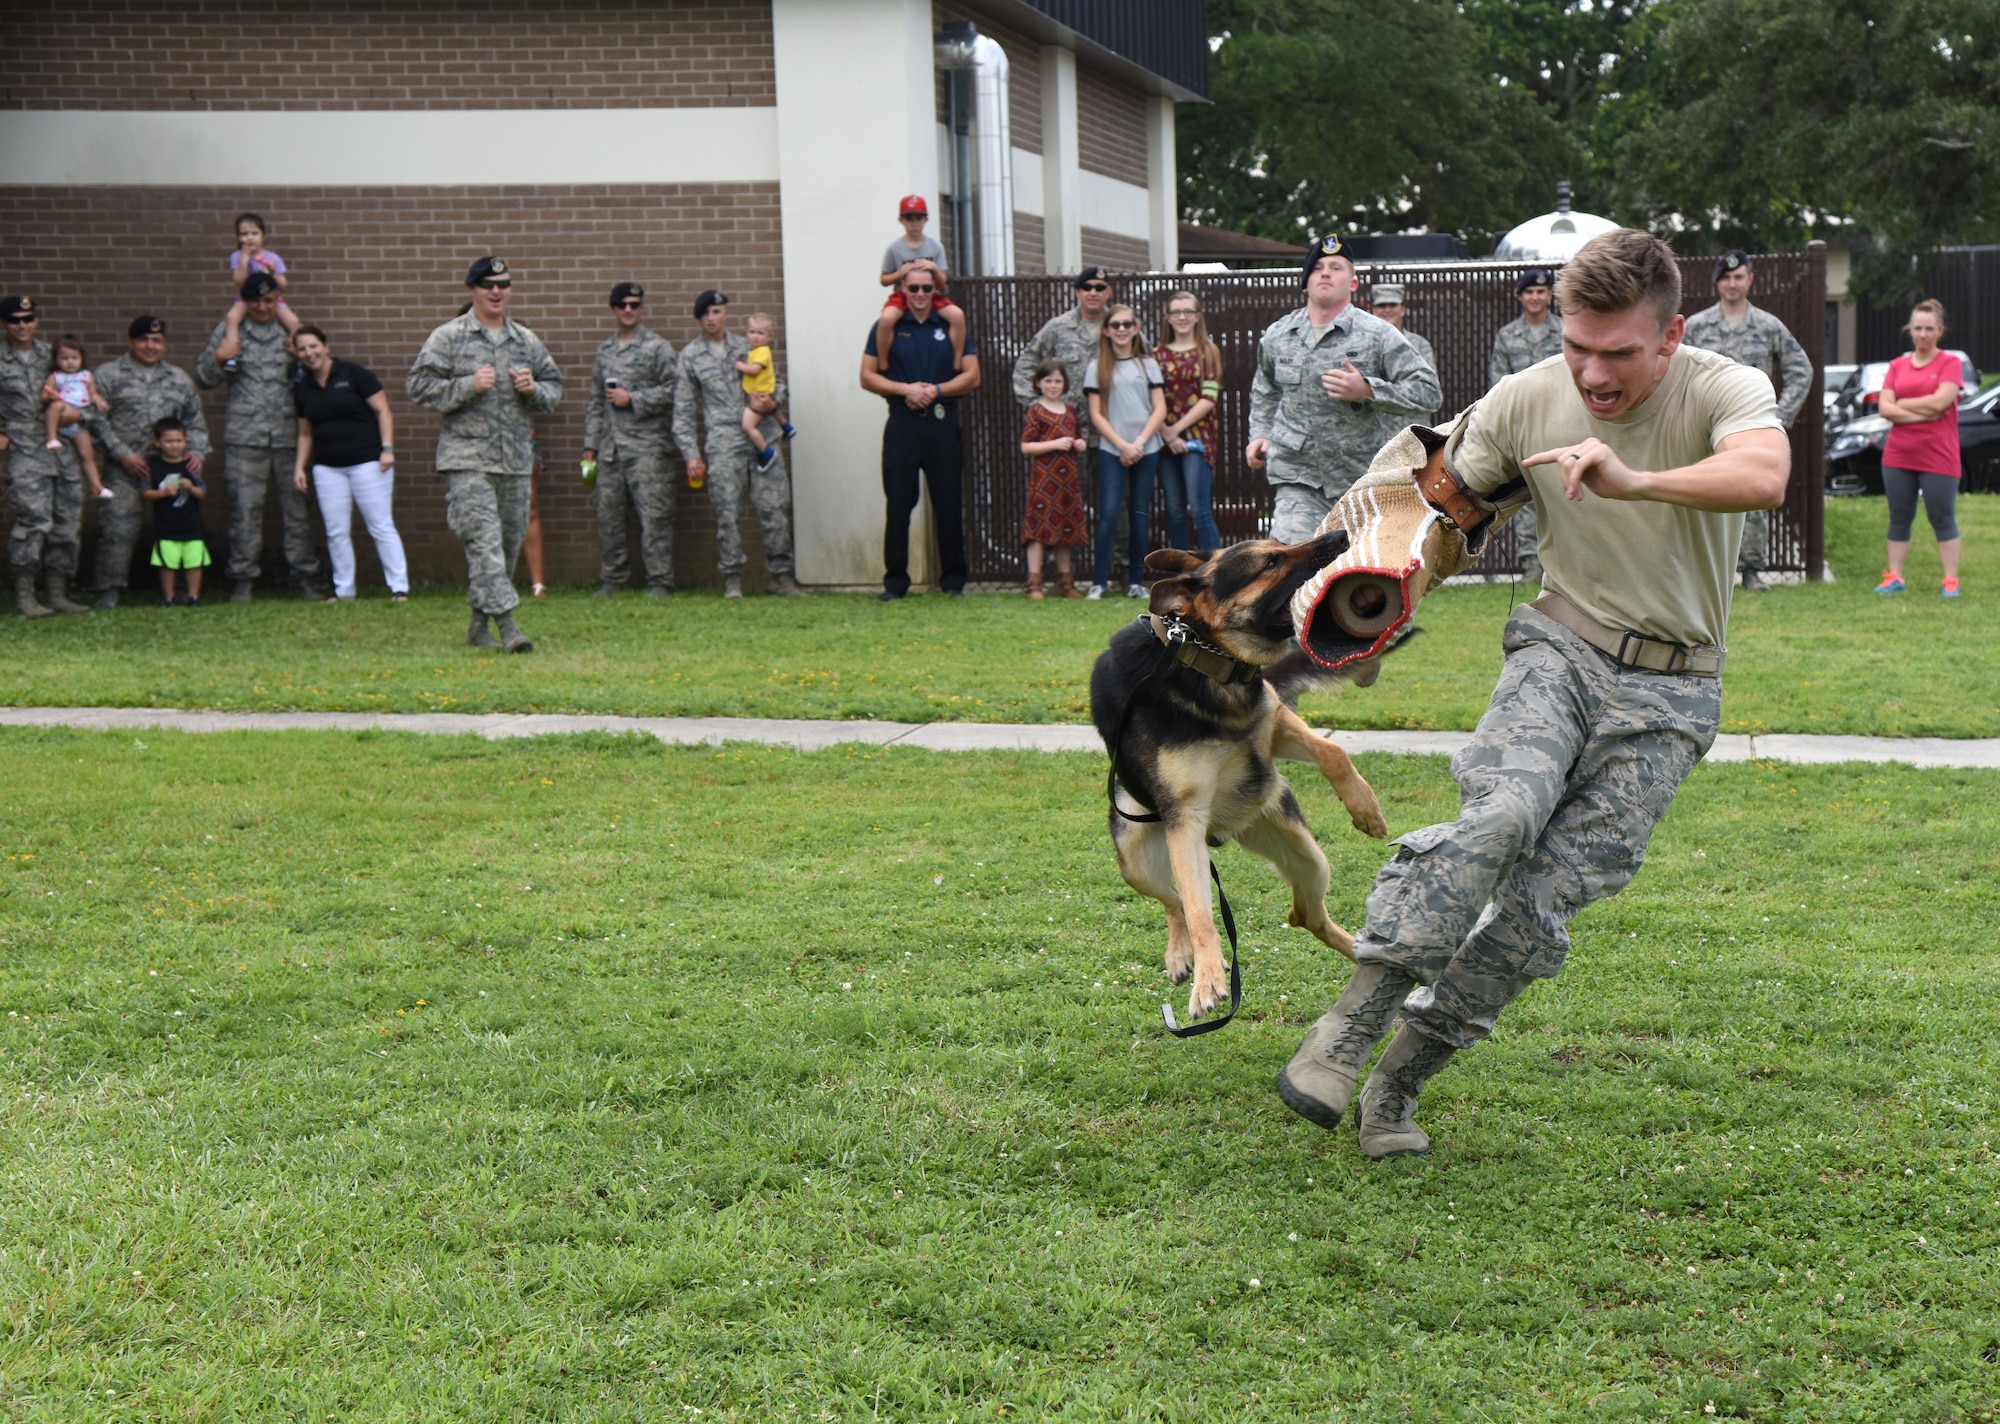 Staff Sgt. Jordan Leiter, 81st Security Forces Squadron military working dog handler, and Gamma, 81st SFS MWD, participate in a MWD demonstration during a family ice cream social at the 81st SFS building July 27, 2017, on Keesler Air Force Base, Miss. The event, hosted by the 81st SFS Defenders Council and Key Spouses, also consisted of a combat arms weapons display and ice cream. (U.S. Air Force photo by Kemberly Groue)